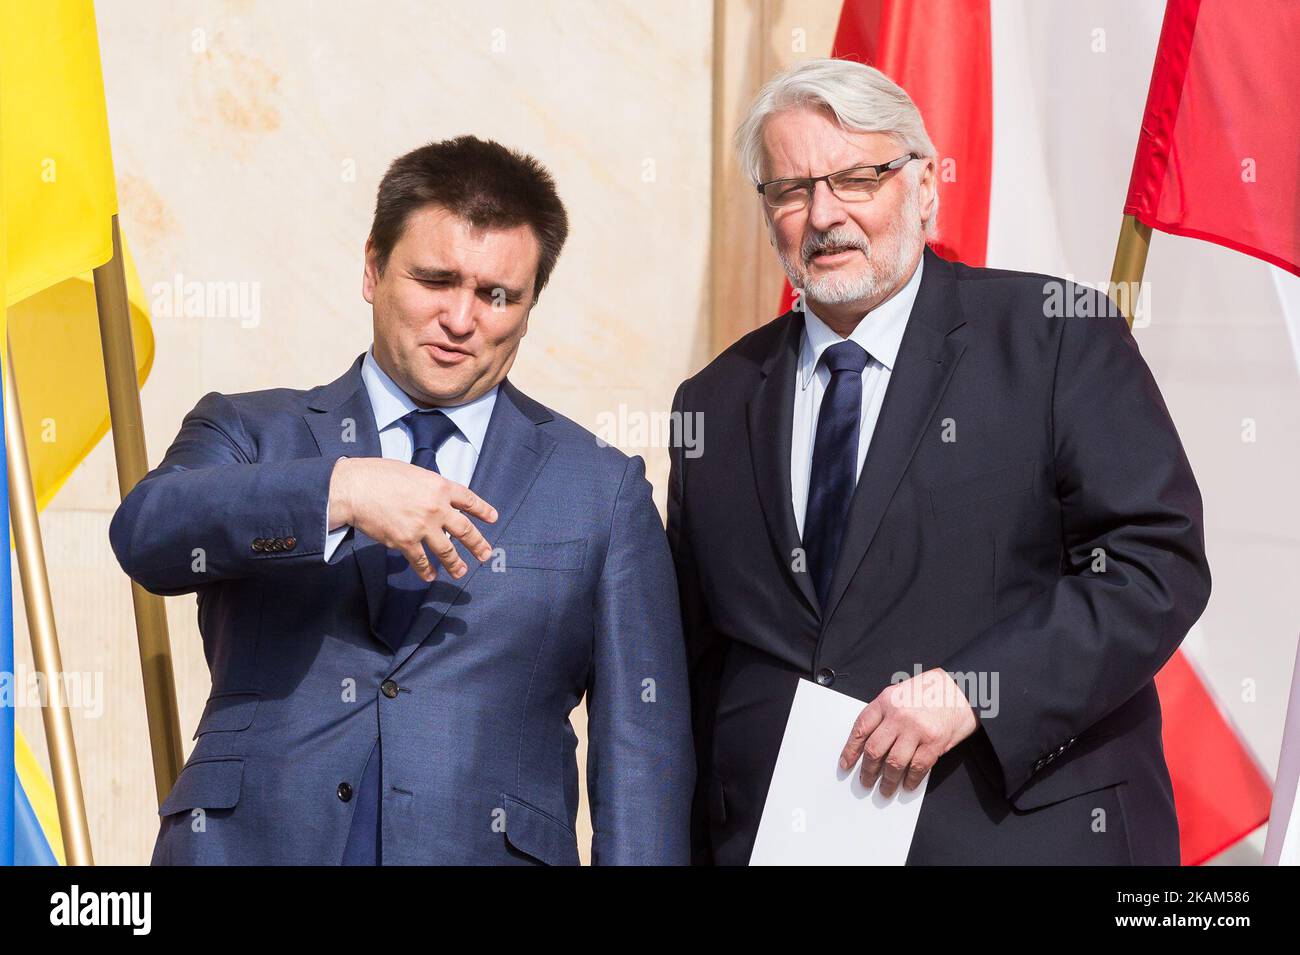 Minister of Foreign Affairs of Poland, Witold Waszczykowski (R) and Minister of Foreign Affairs of Ukraine, Pavlo Klimkin (L) in Warsaw, Poland on 15 March 2017 (Photo by Mateusz Wlodarczyk/NurPhoto) *** Please Use Credit from Credit Field *** Stock Photo